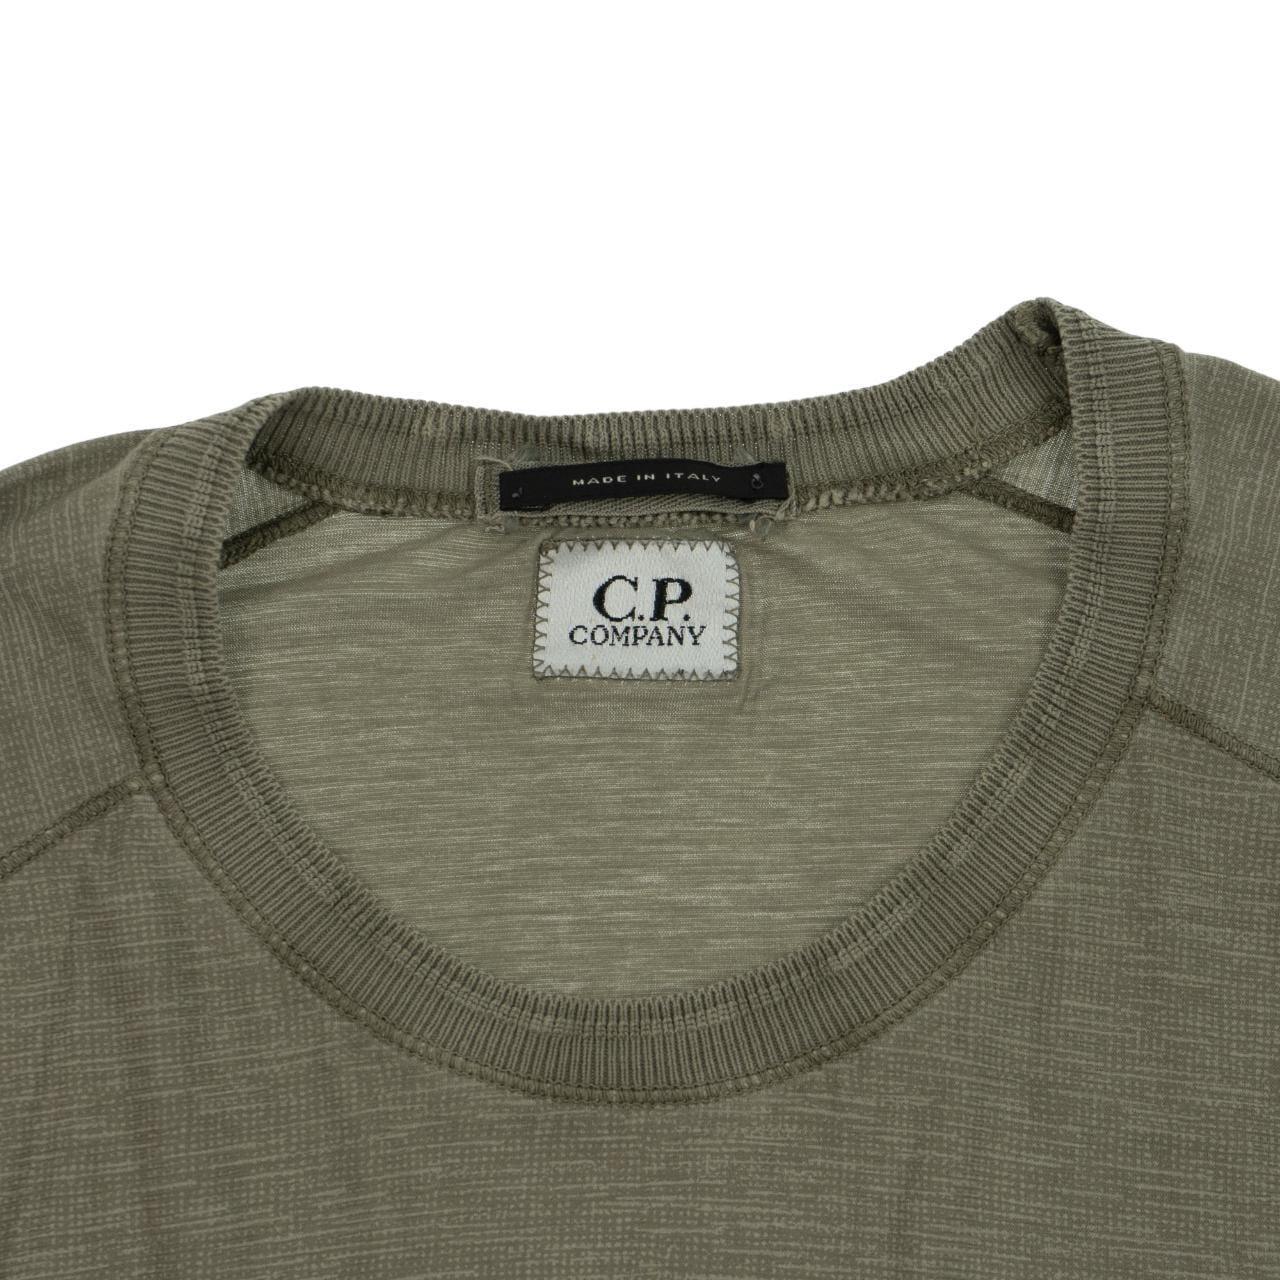 Vintage CP Company T Shirt Size S - Known Source